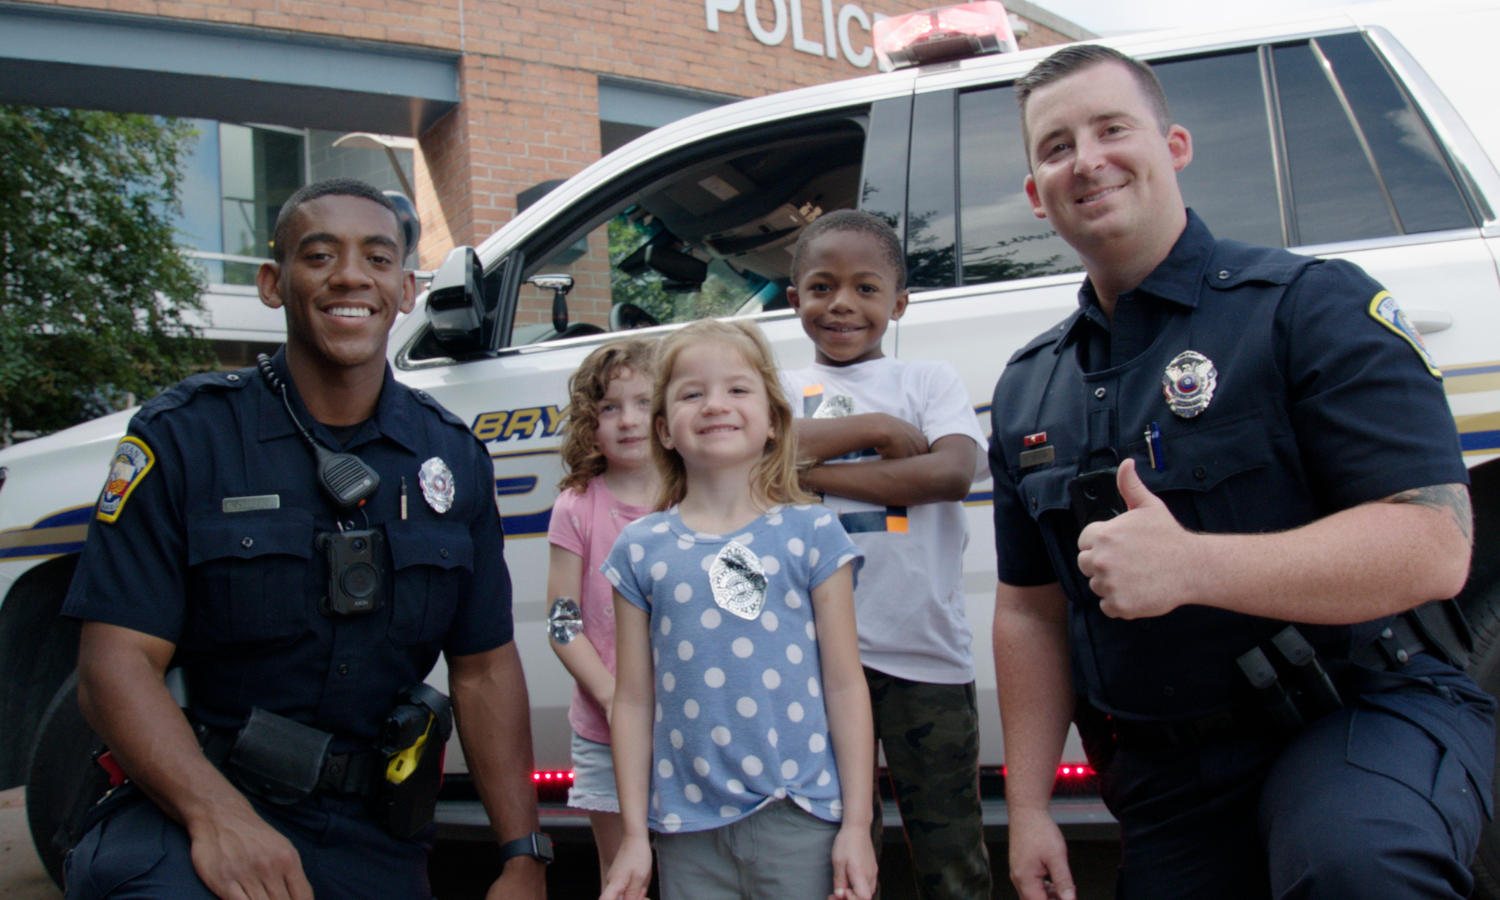 Photo of Bryan Police Officers with children at an event.